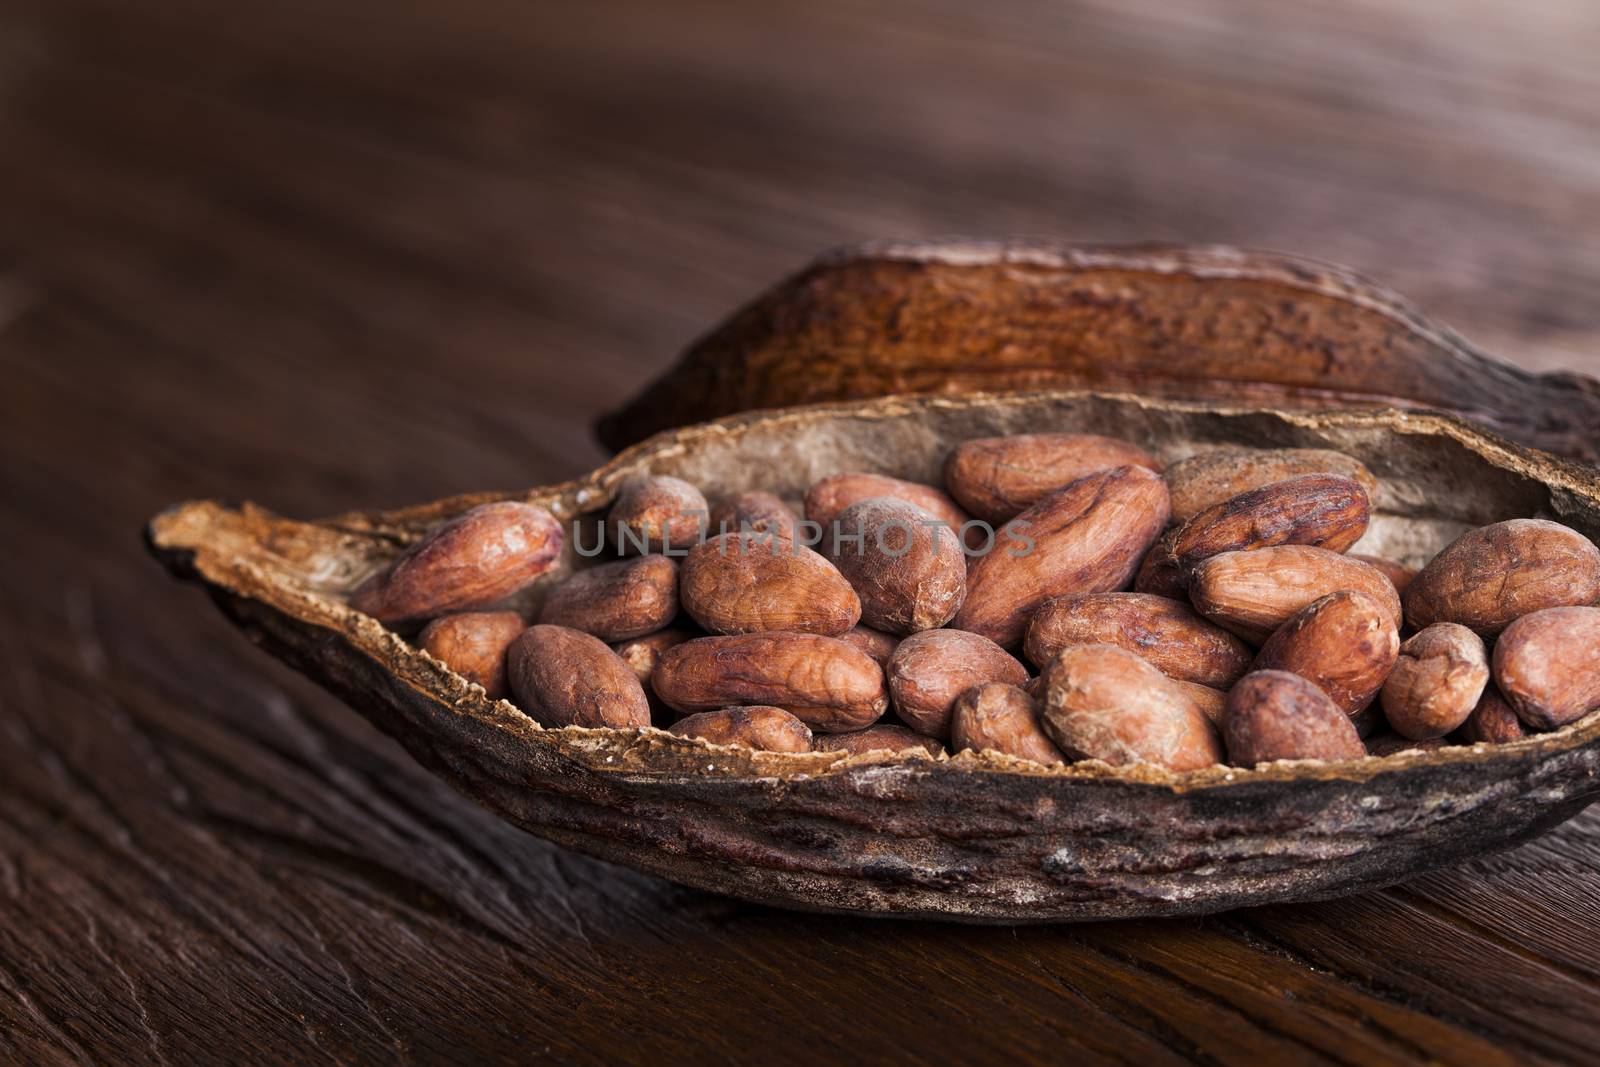 Cocoa pod on wooden background by JanPietruszka